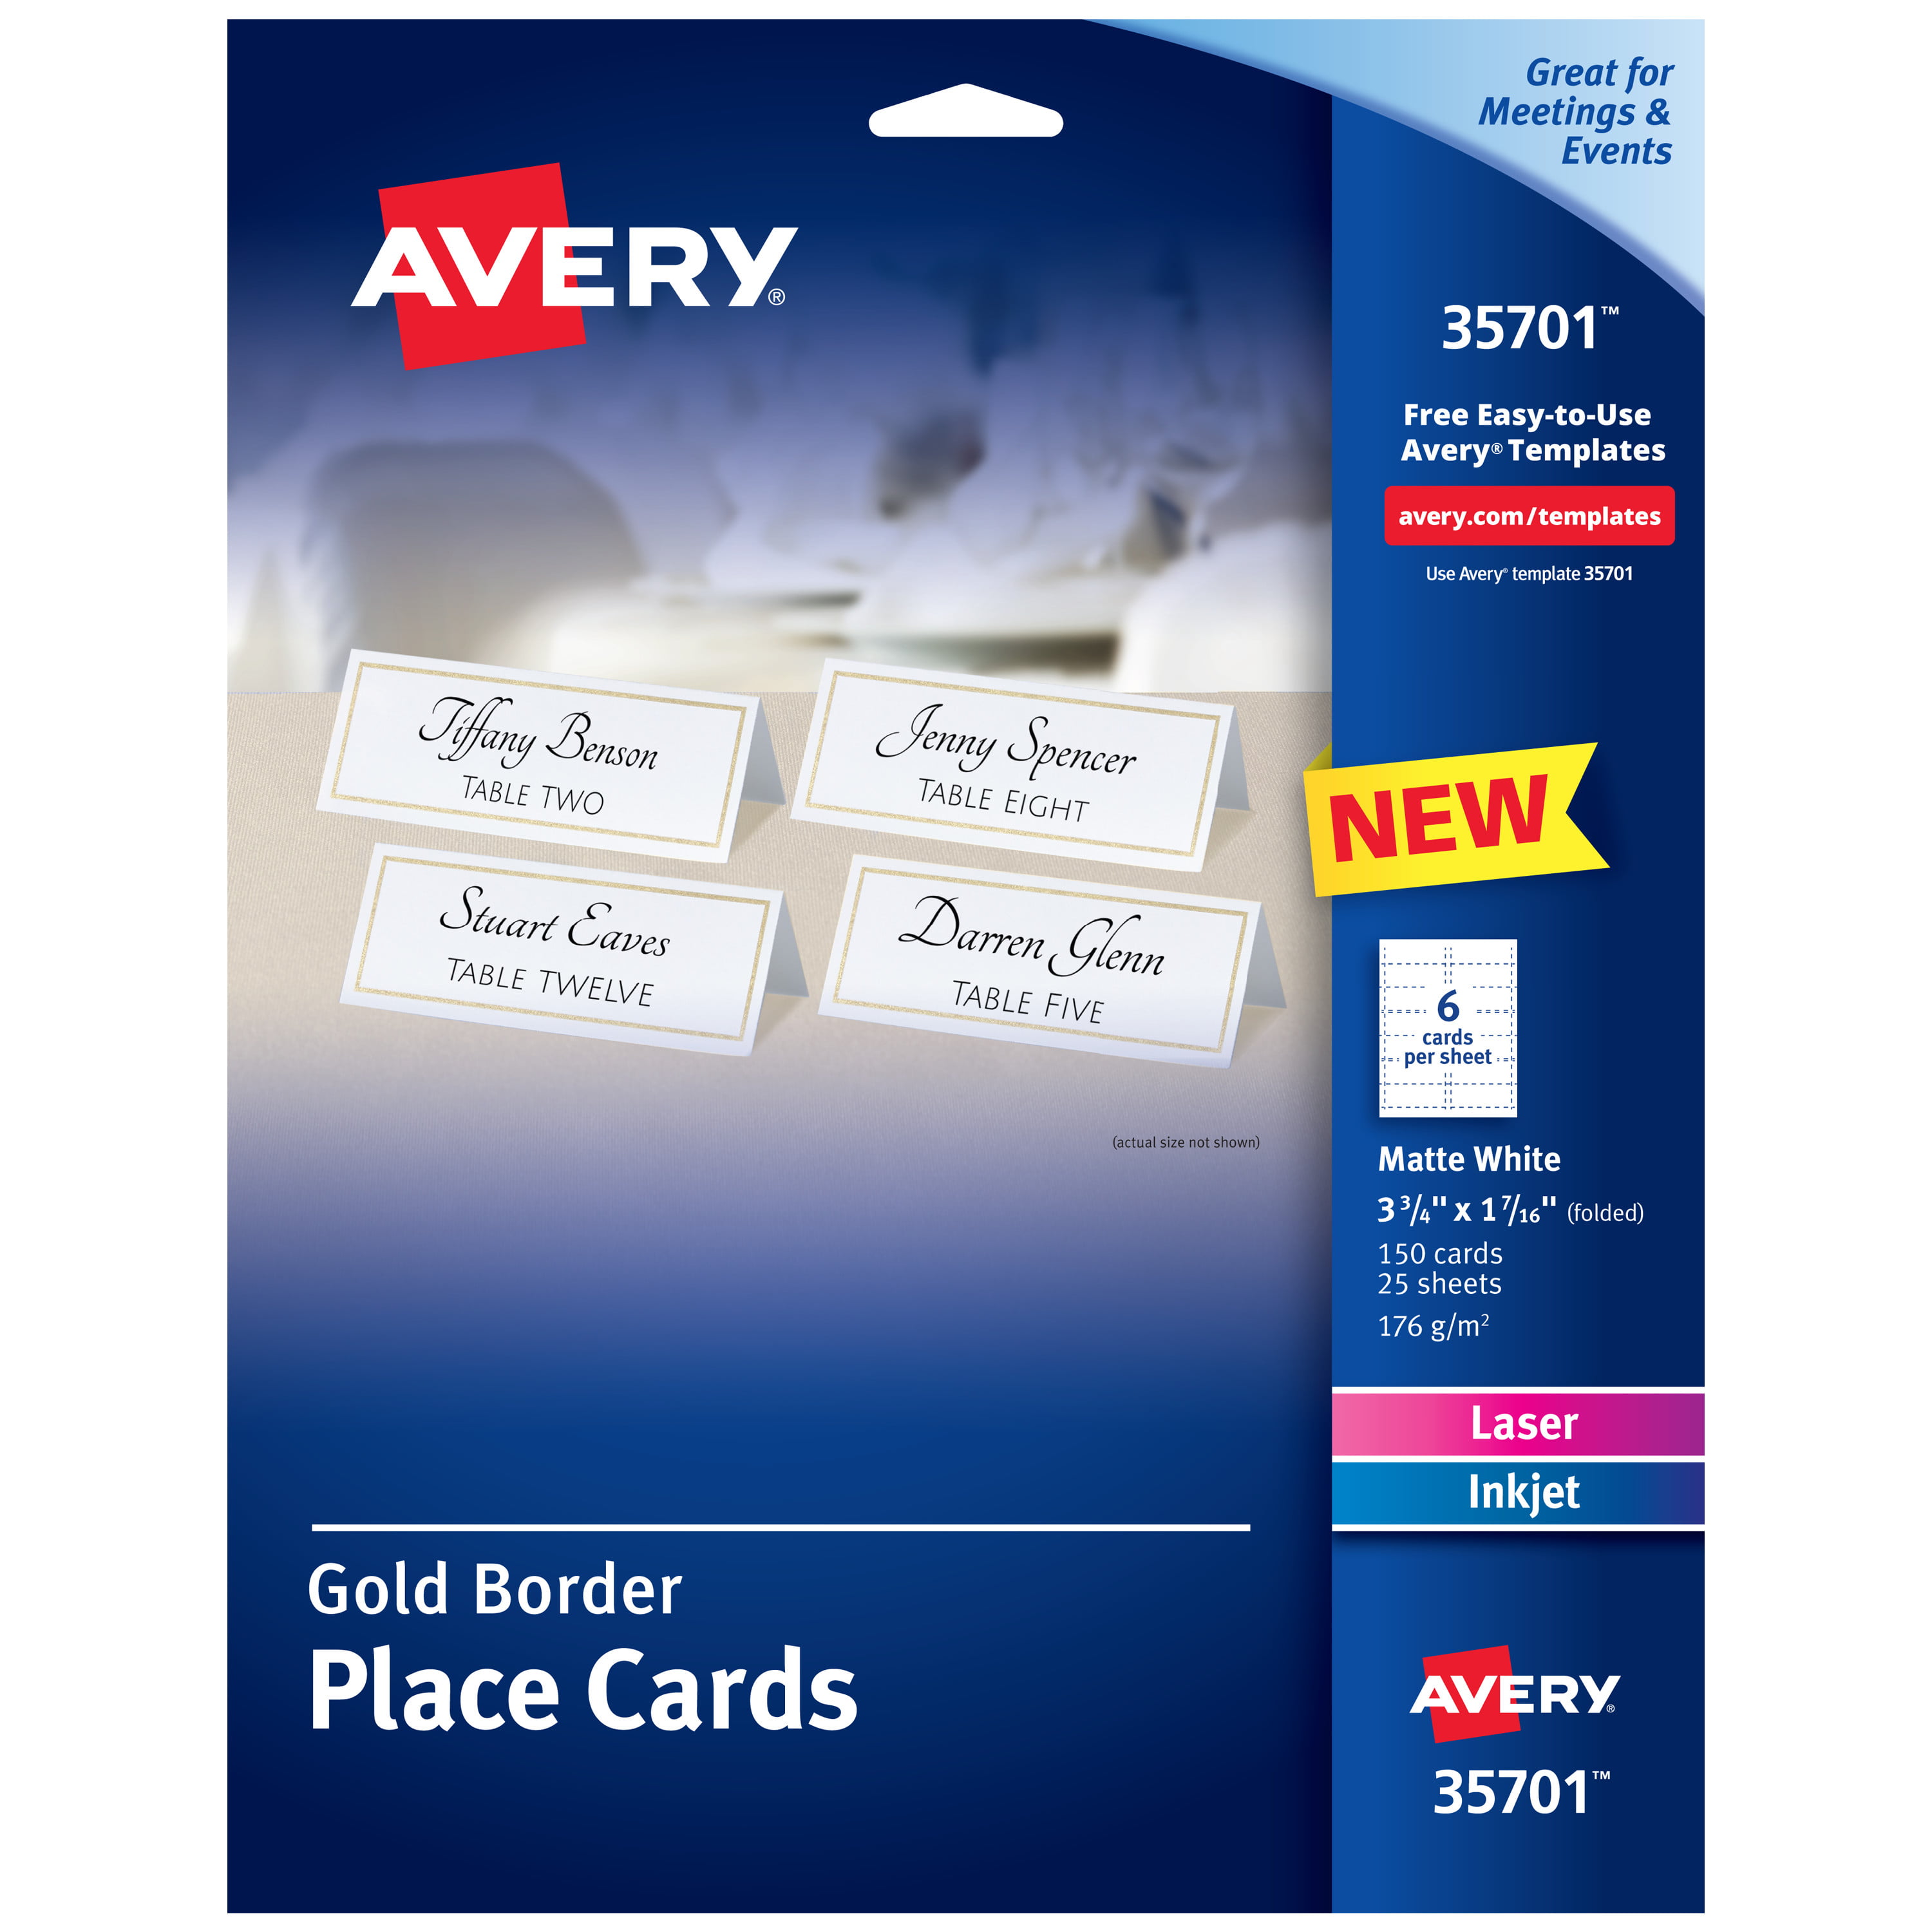 avery-place-cards-with-gold-border-1-7-16-x-3-3-4-65-lbs-150-cards-walmart-walmart